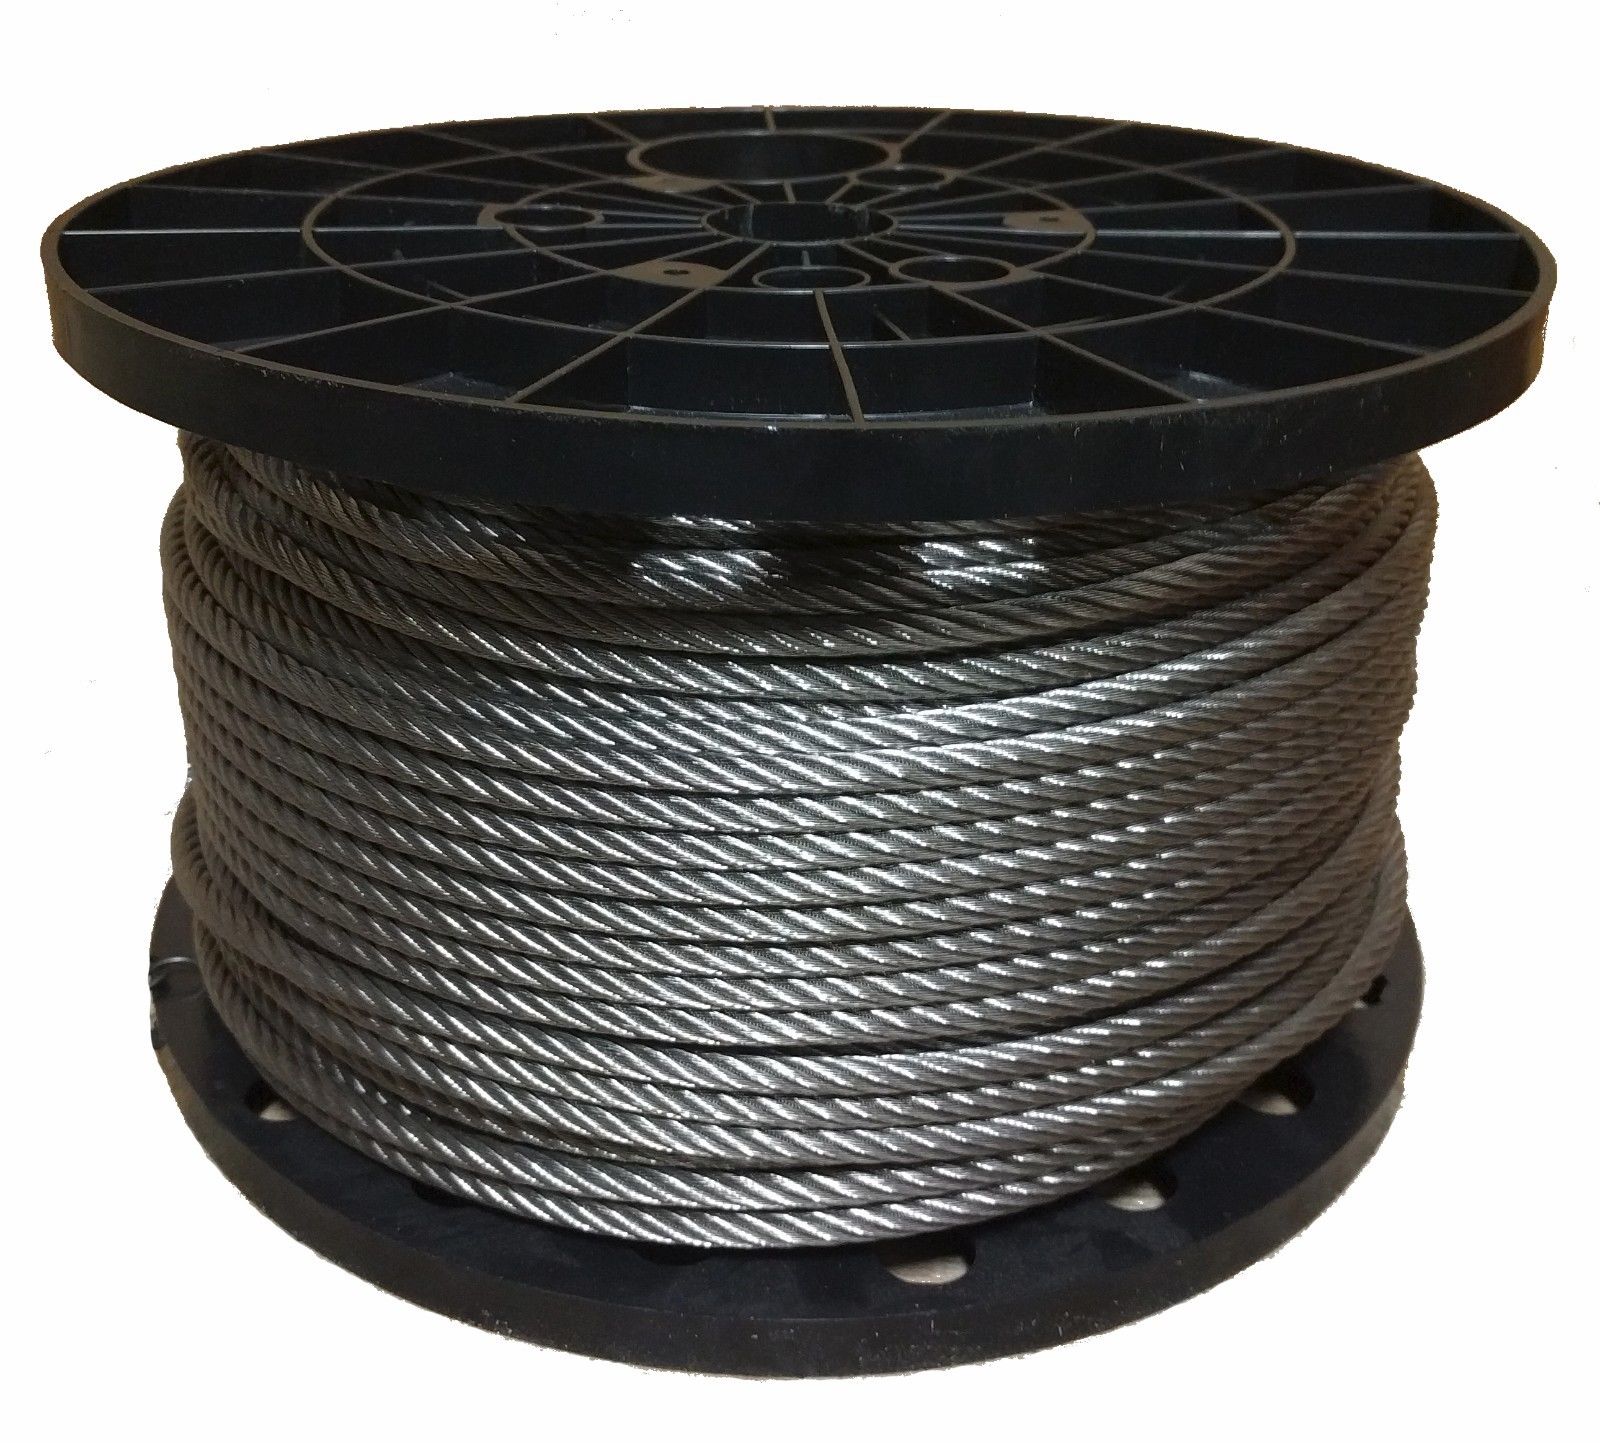 500 50 ft 250 1000 ft Black Powder Coated Galvanized Cable Wire Rope 1/4 7x19-50 100